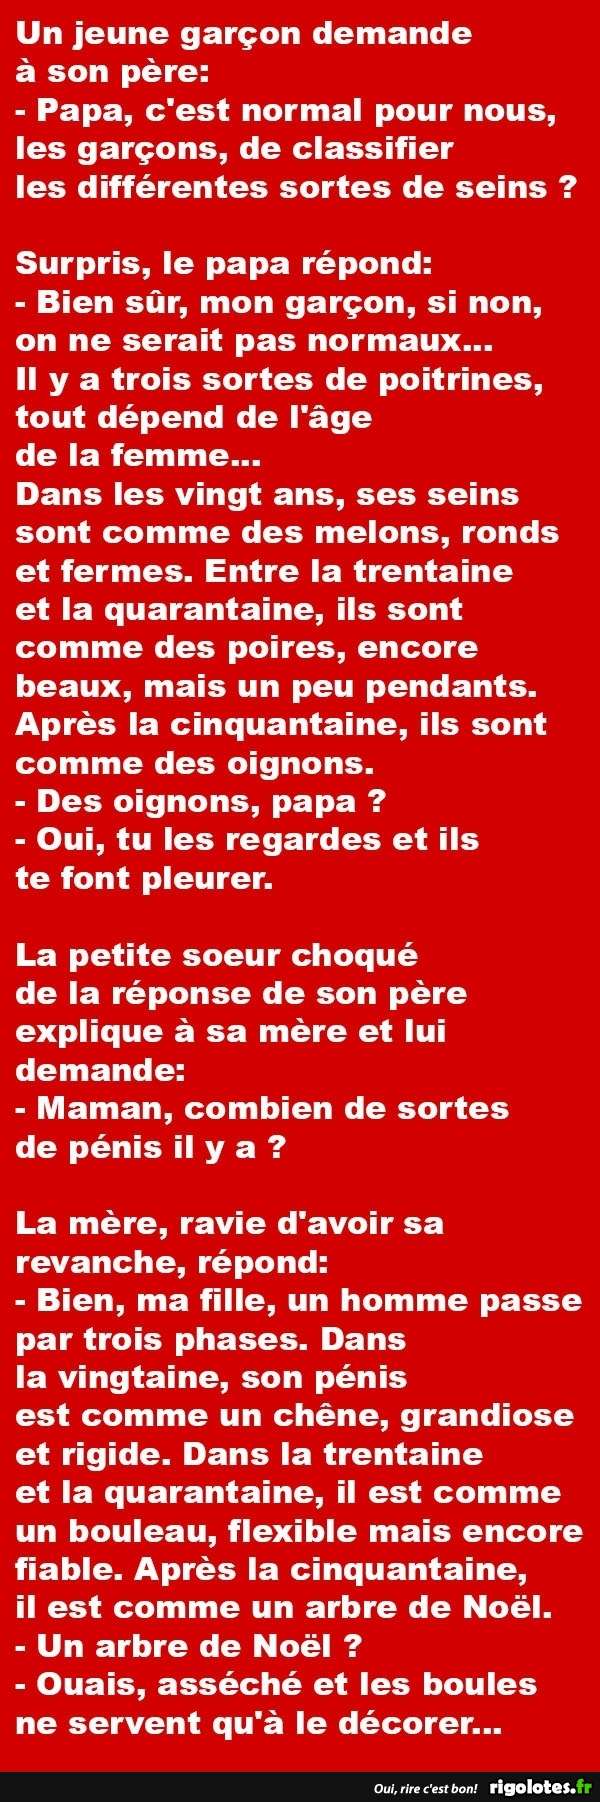 HUMOUR - blagues - Page 18 20230810